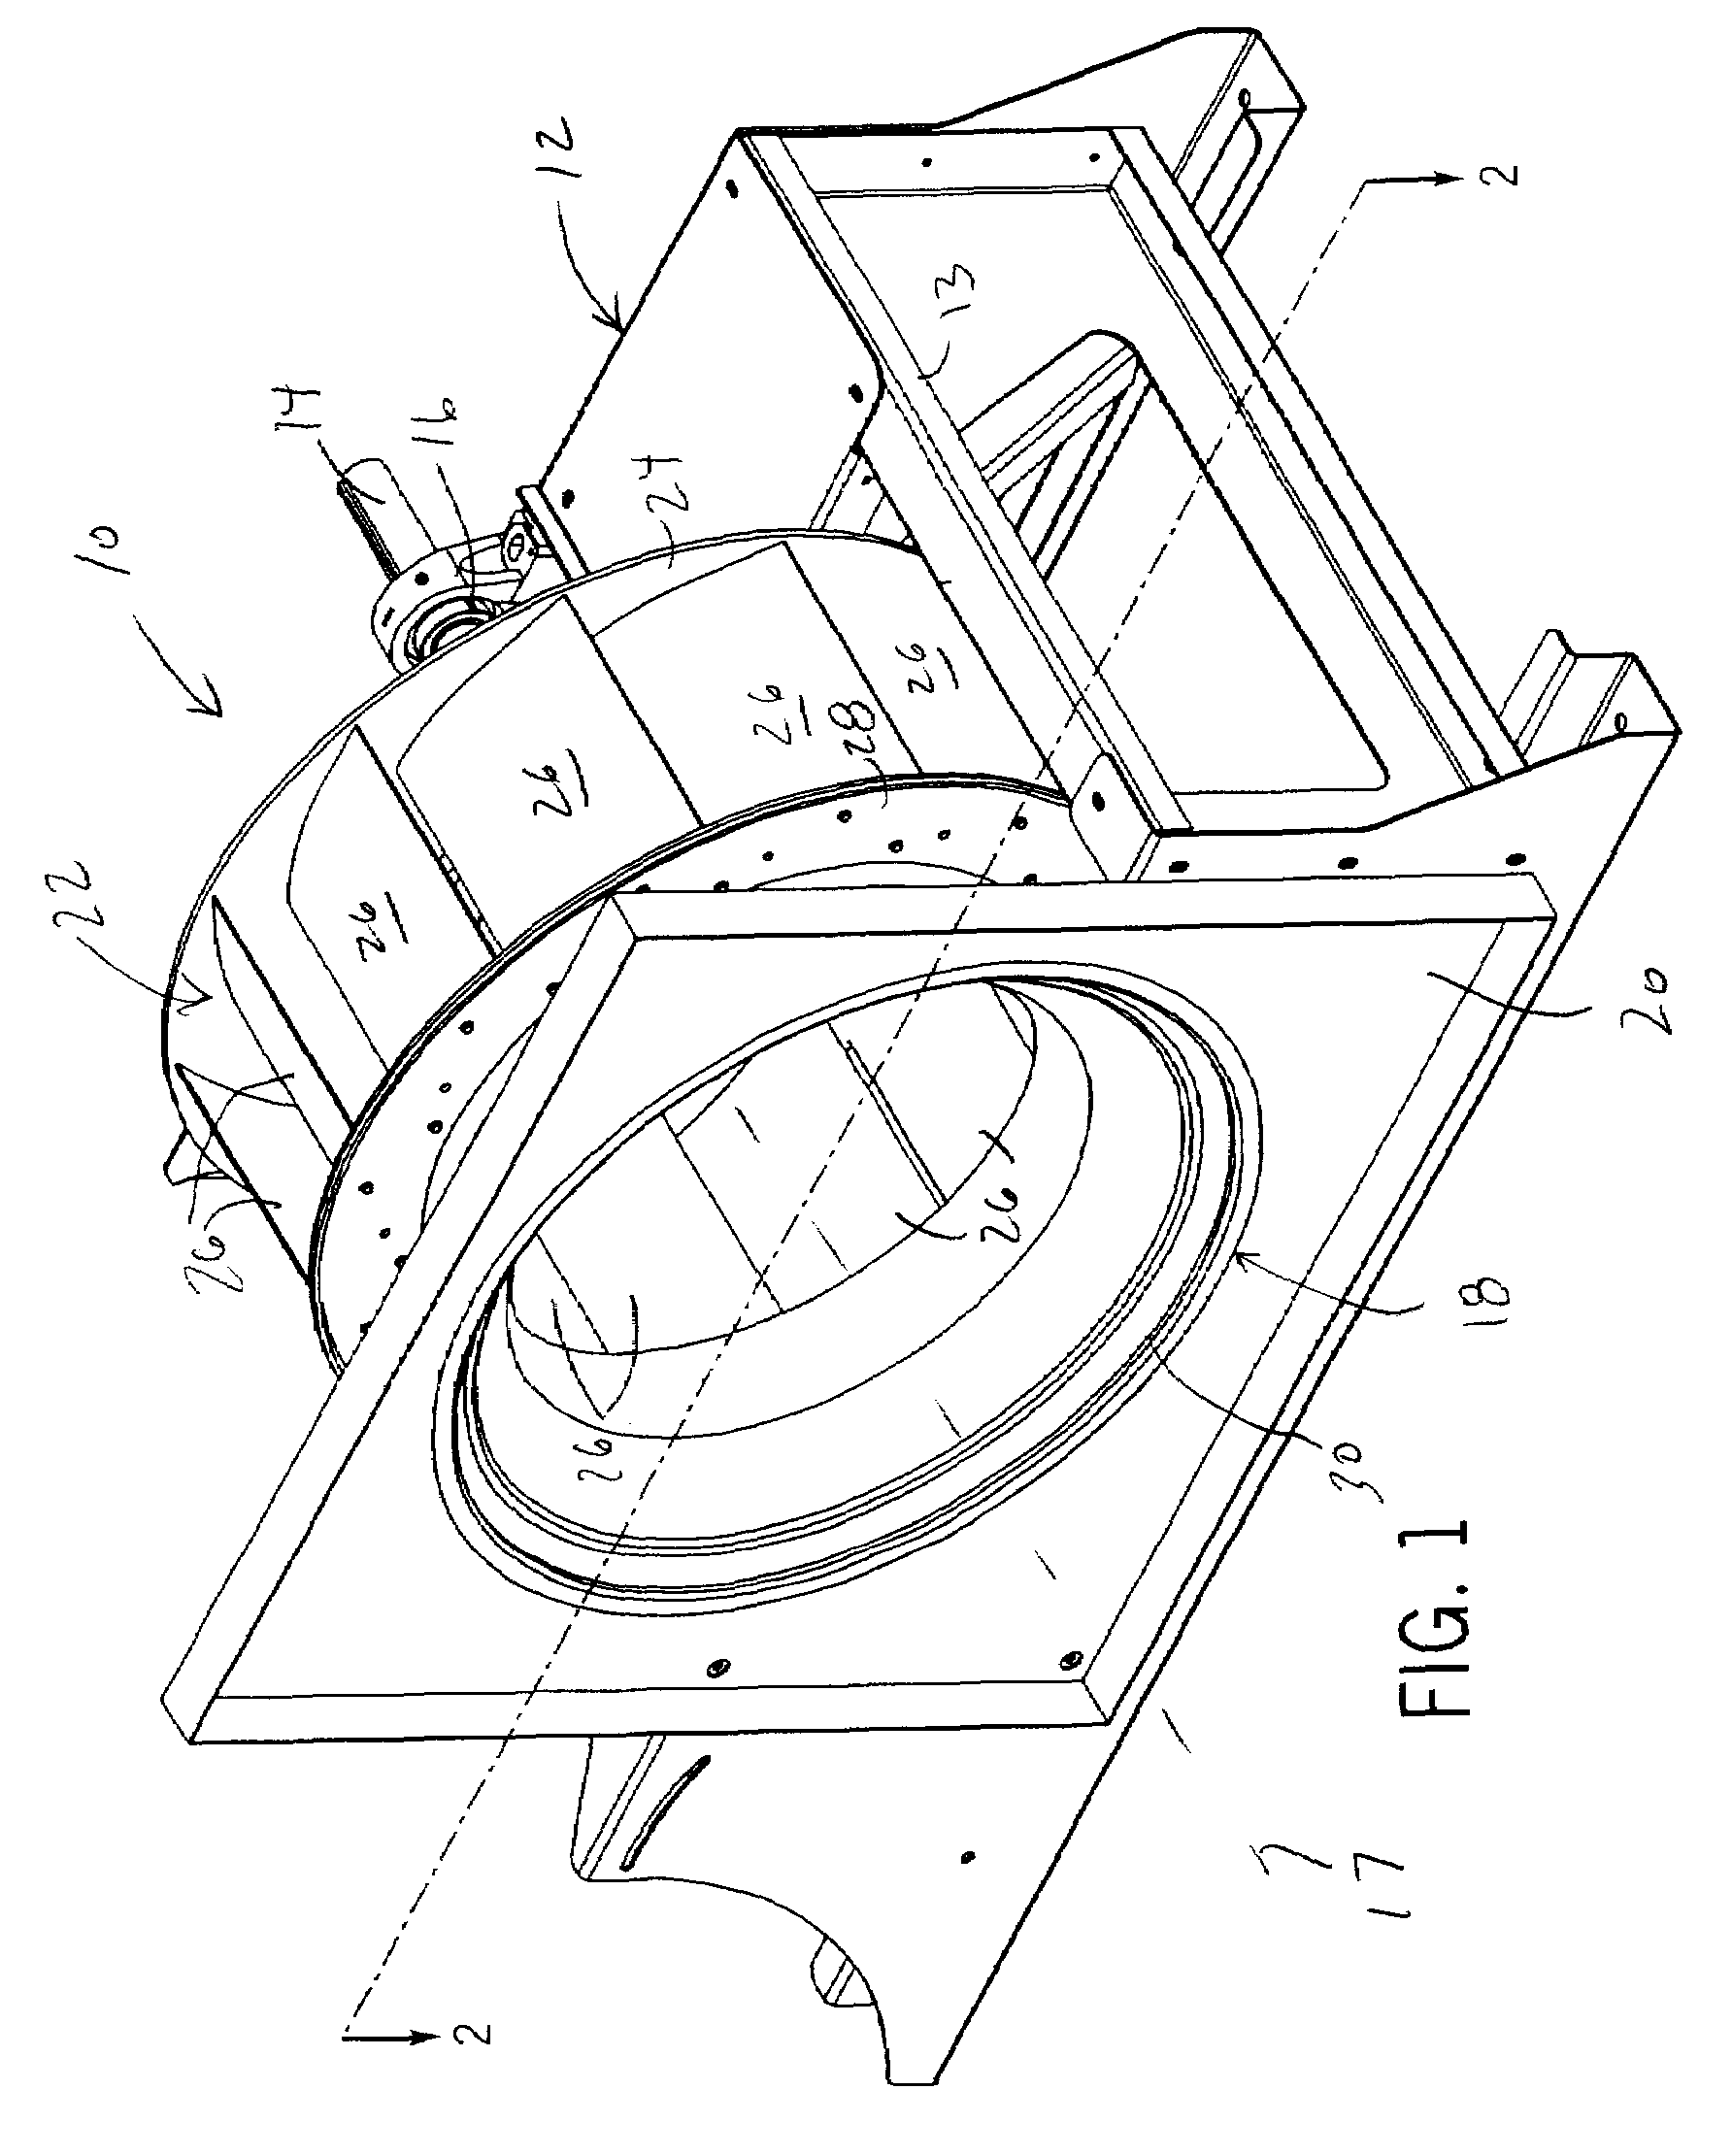 Centrifugal fan with turbulence inducing inlet bell